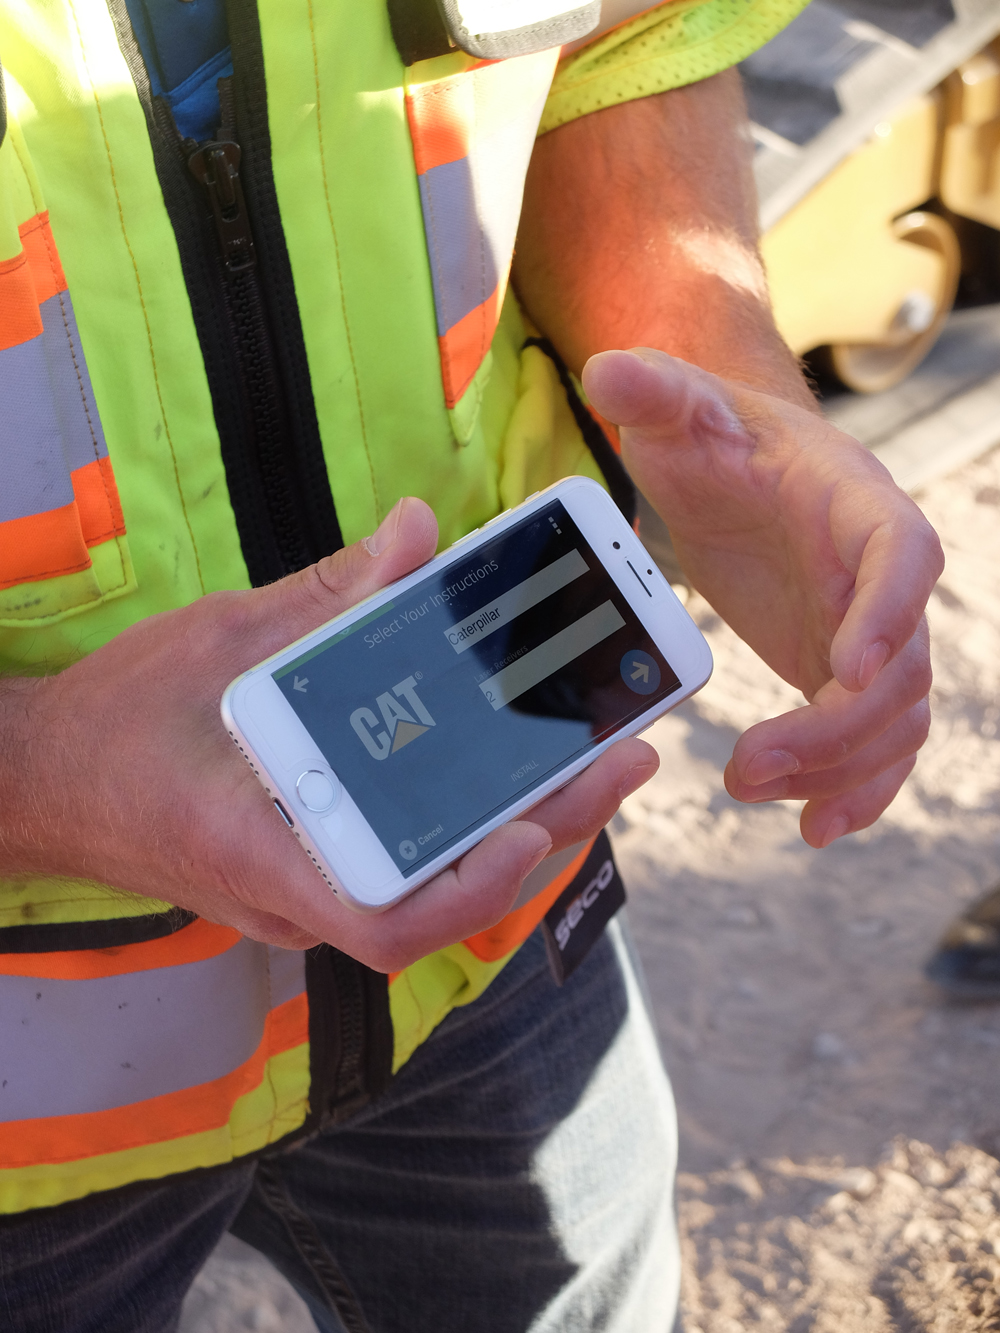 New tools allow firms to monitor operations and carry out remote surveying to enable social distancing on the modern construction site